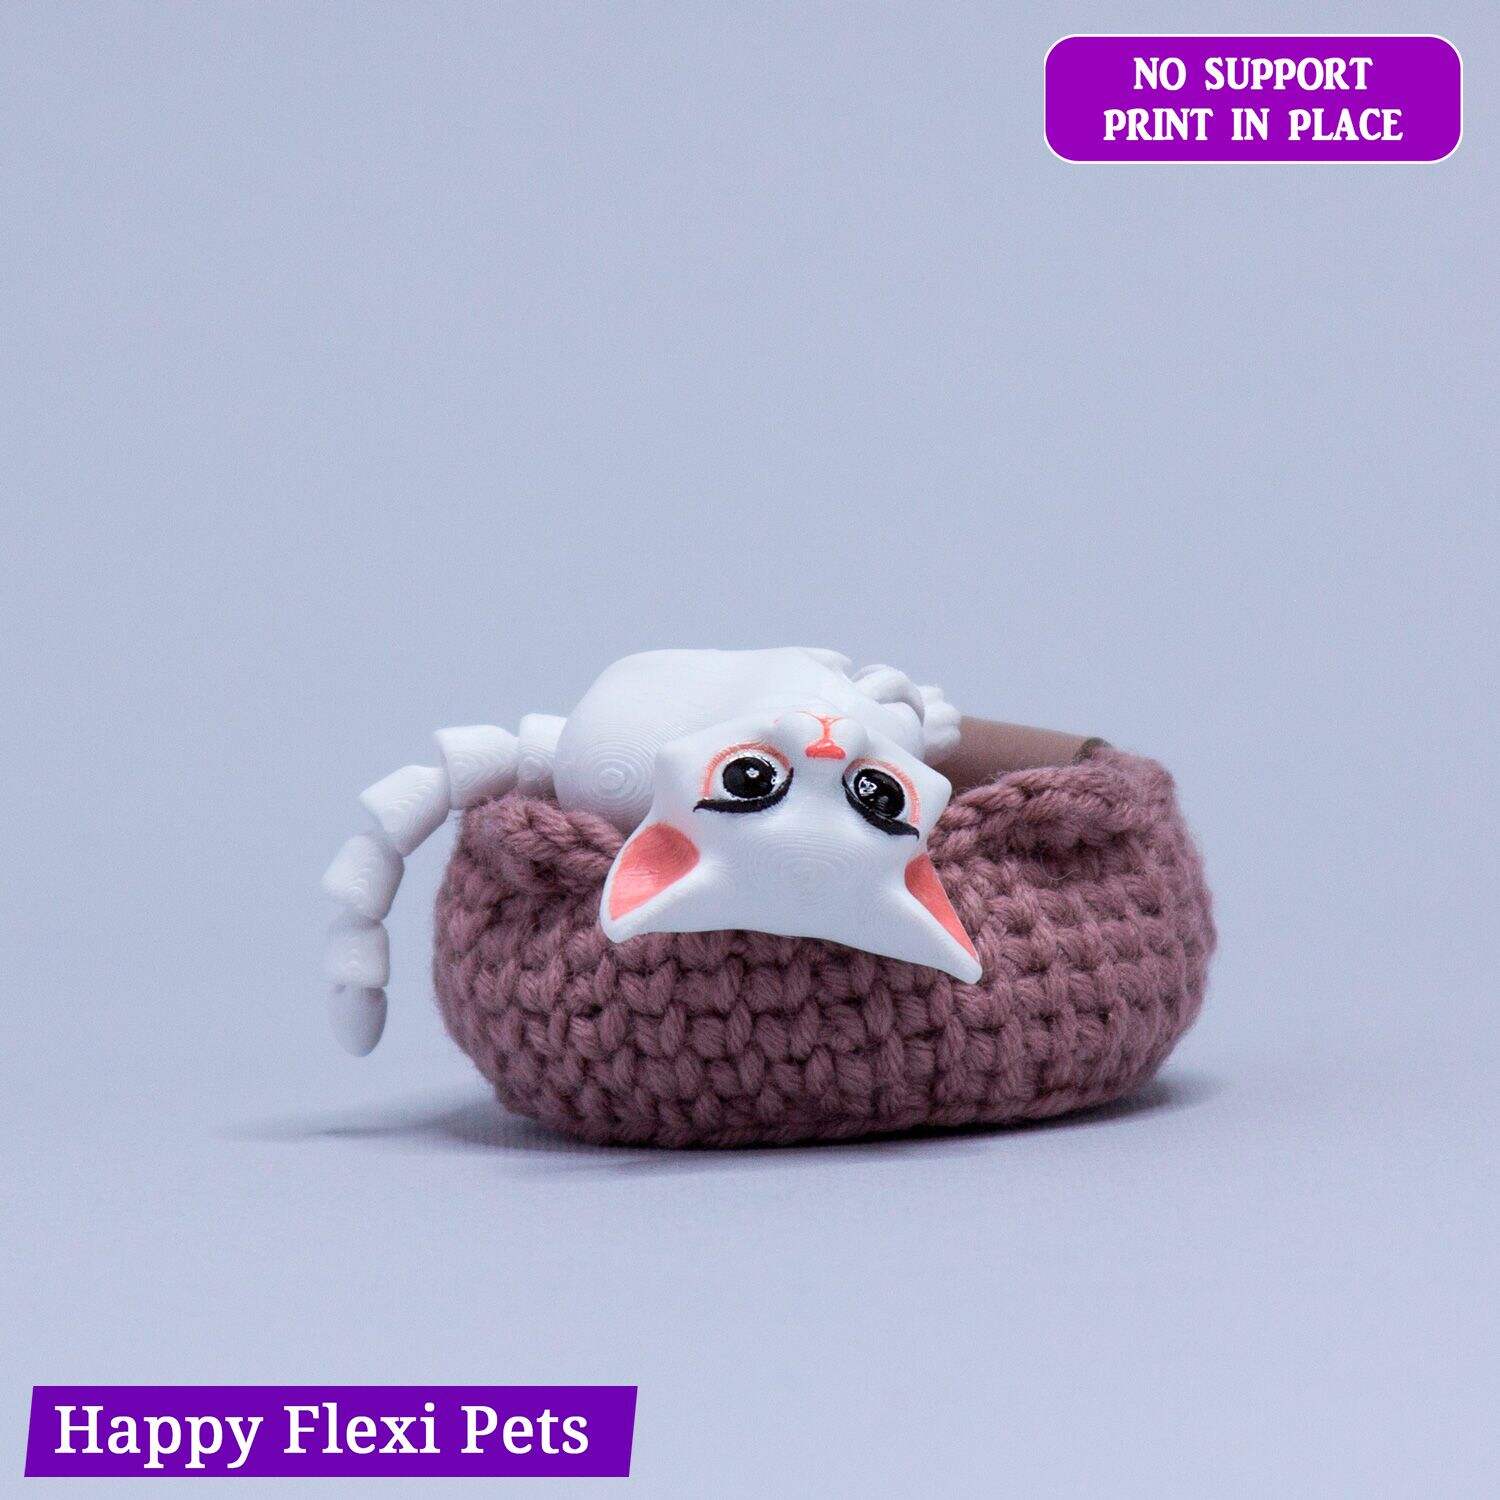 Snowflake the kitten articulated toy by Happy Flexi pets